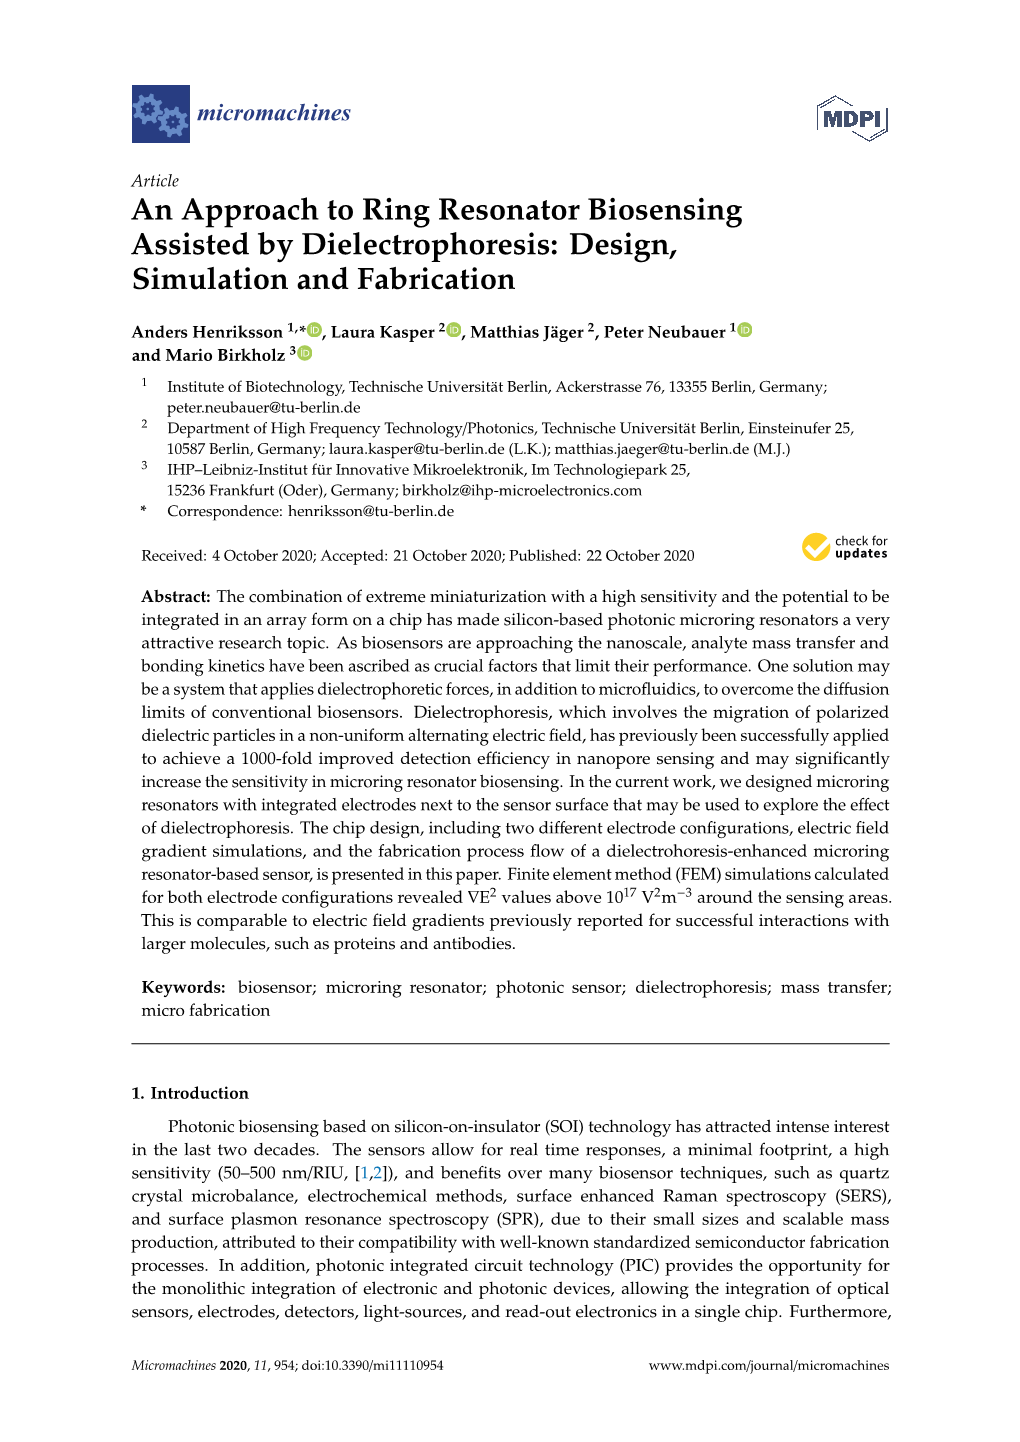 An Approach to Ring Resonator Biosensing Assisted by Dielectrophoresis: Design, Simulation and Fabrication